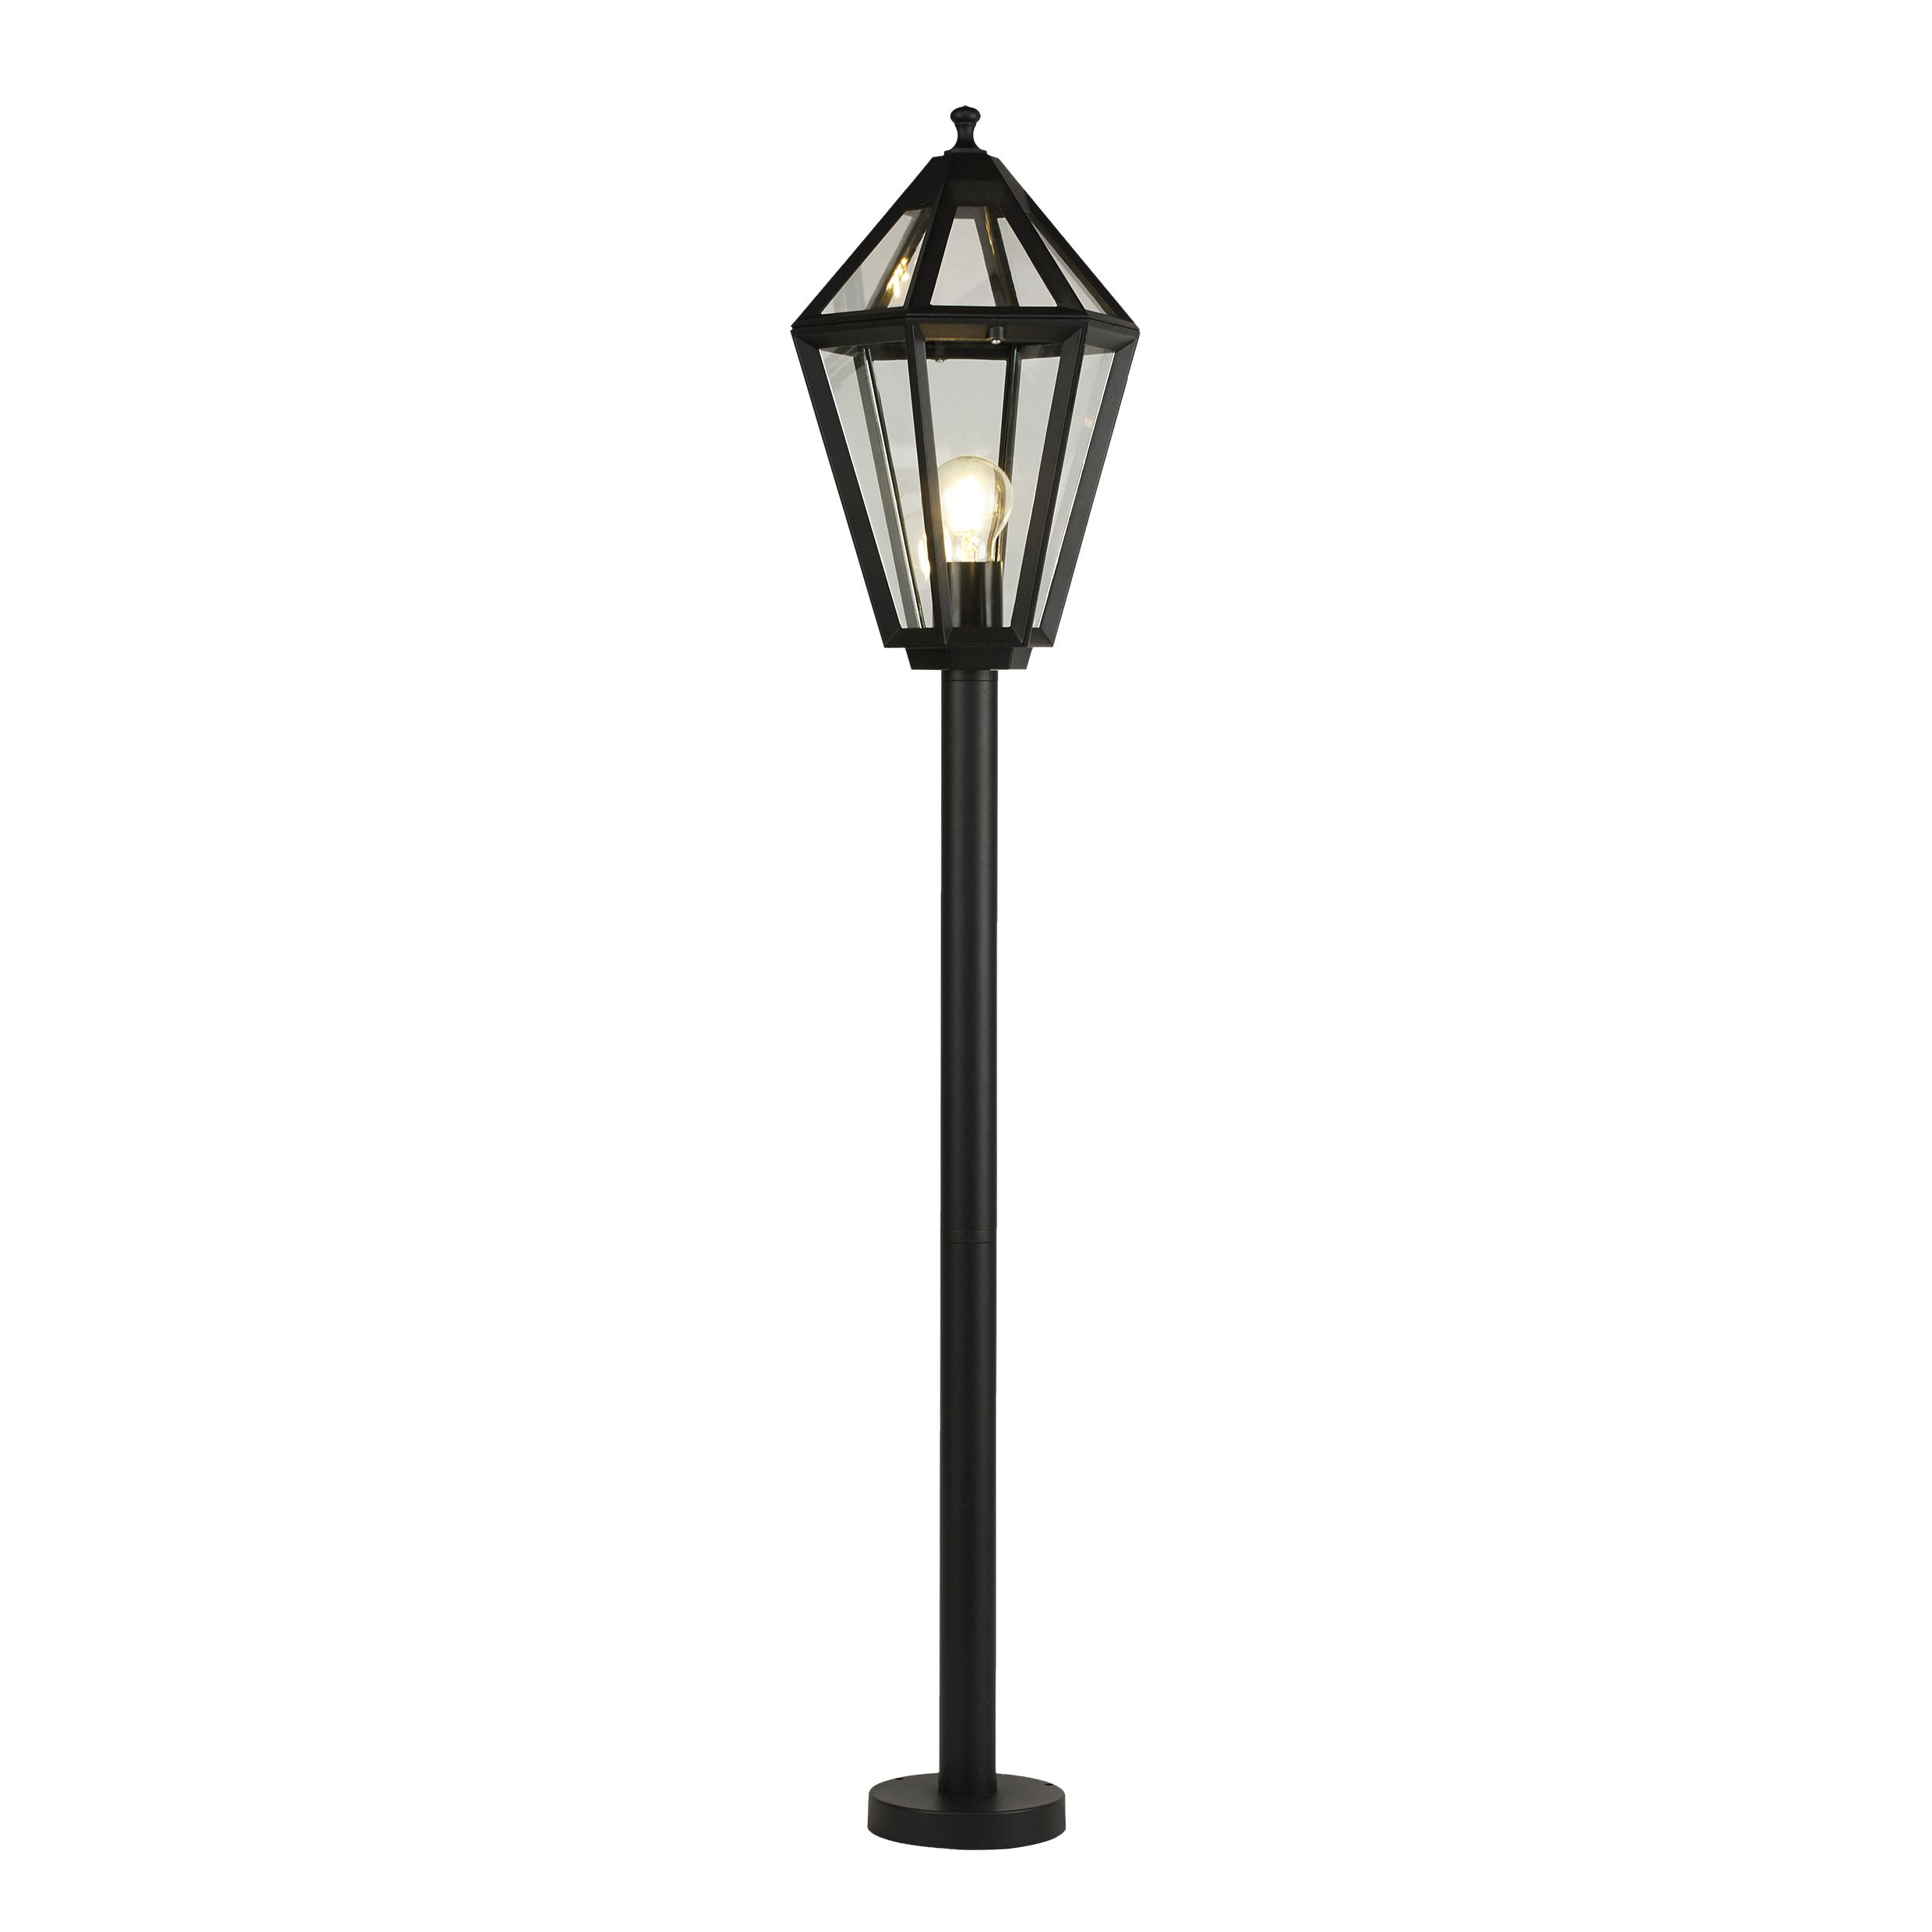 GoodHome Lantern Black Mains-powered 1 lamp Outdoor 6 faces Post light (H)1200mm